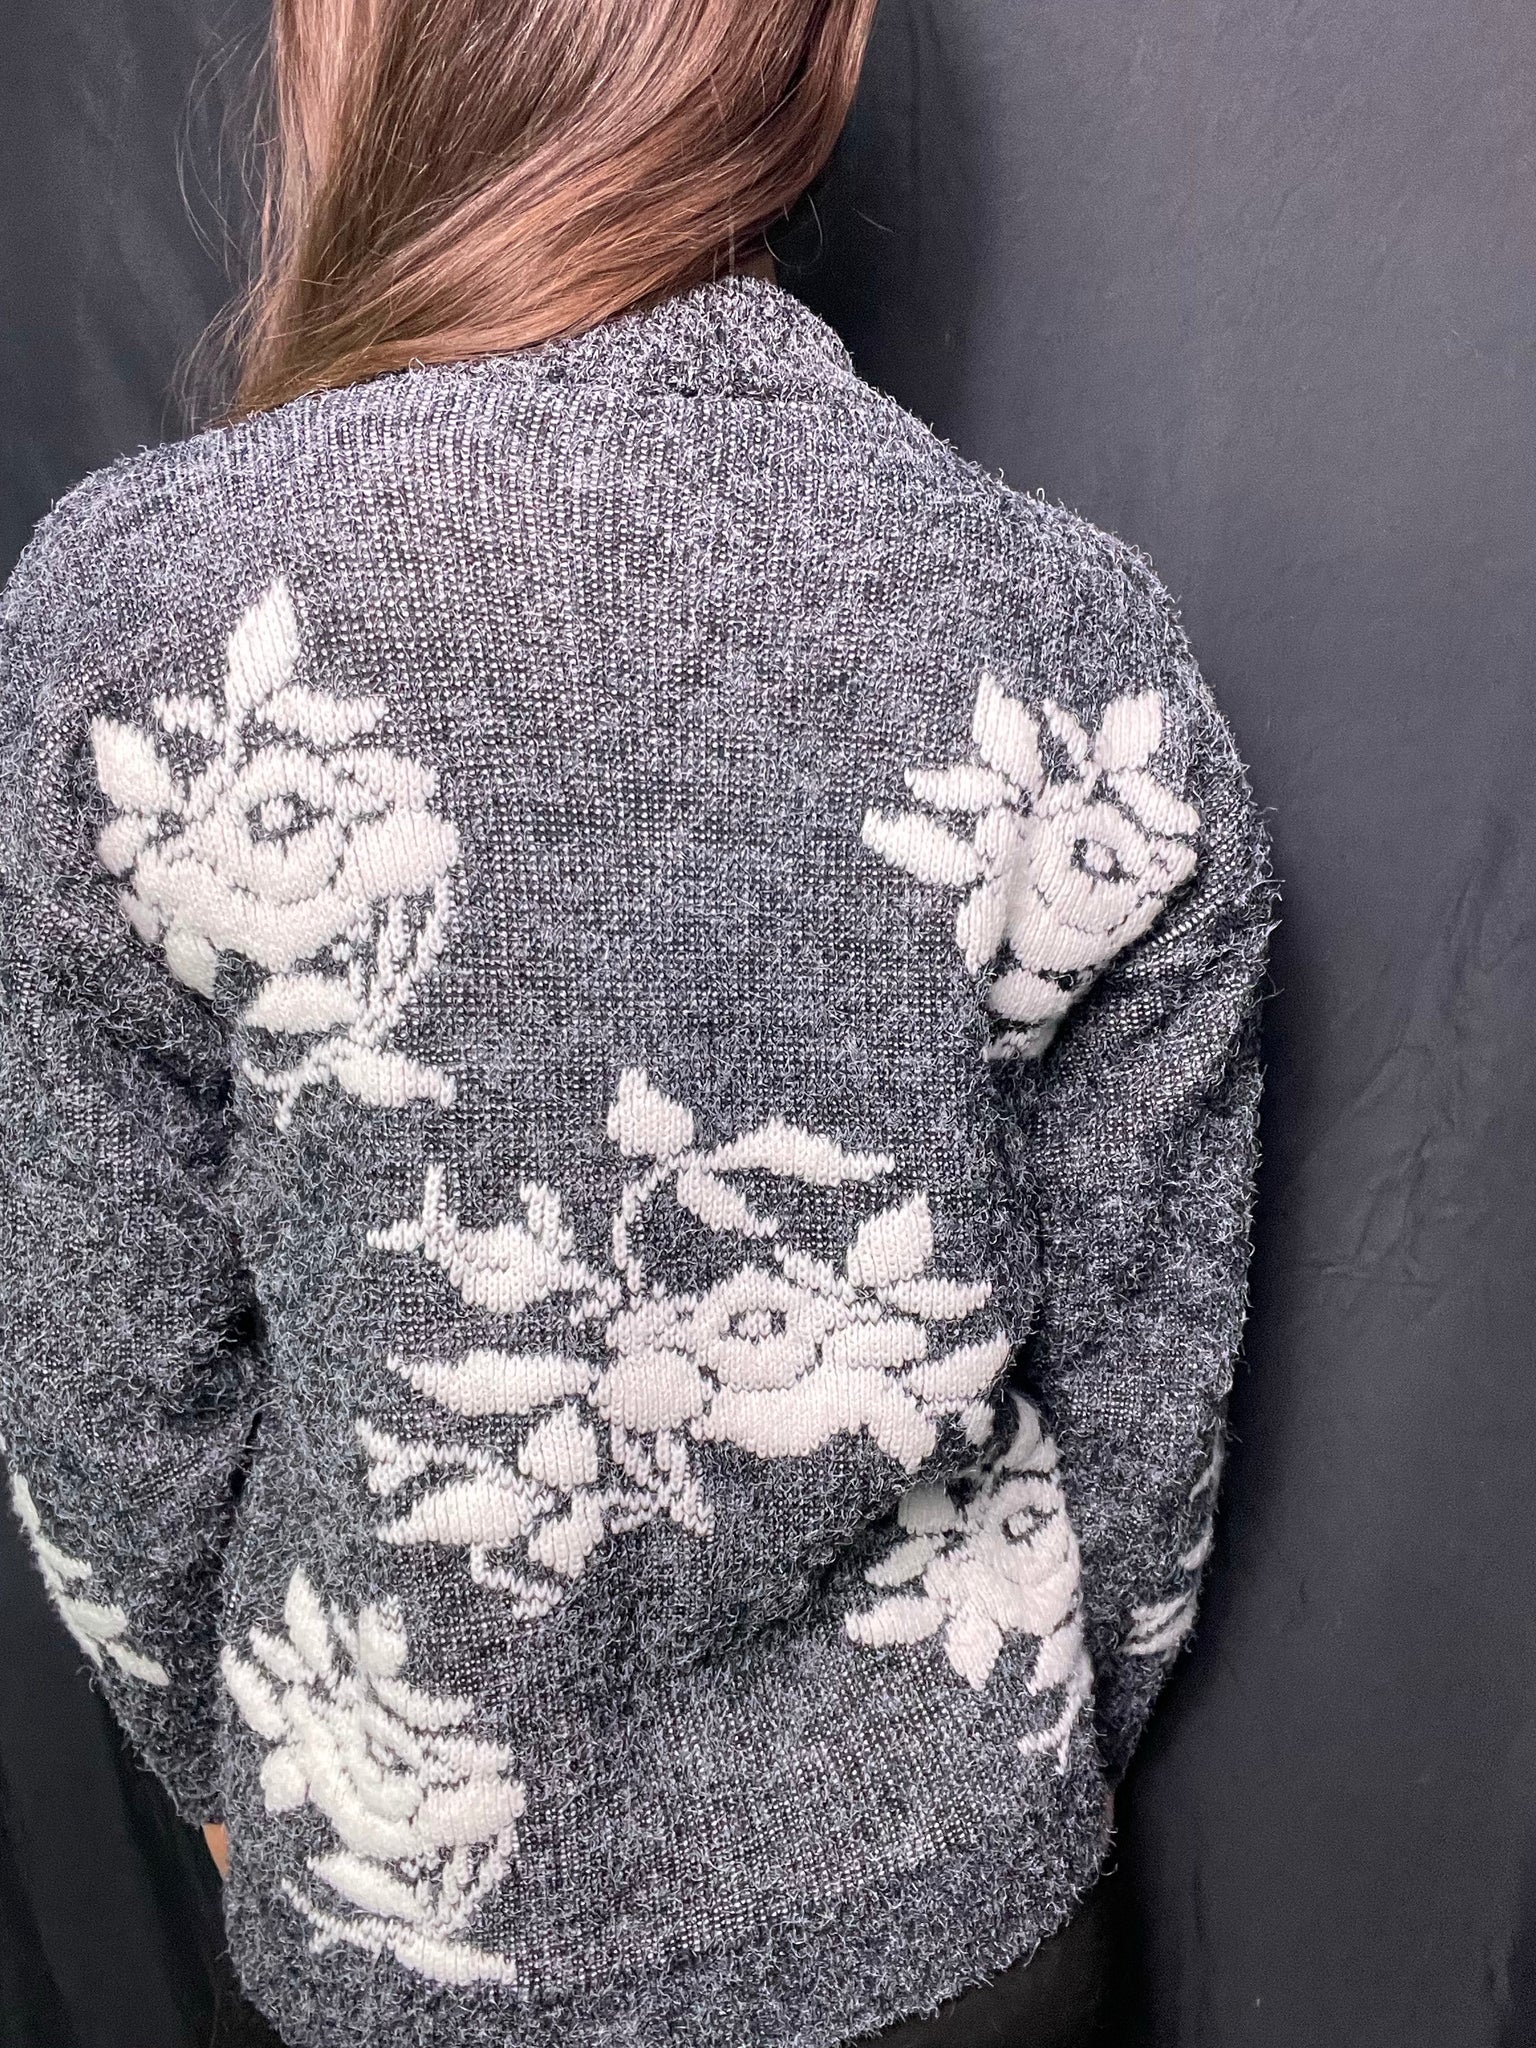 80s rose print sweater, Size 6